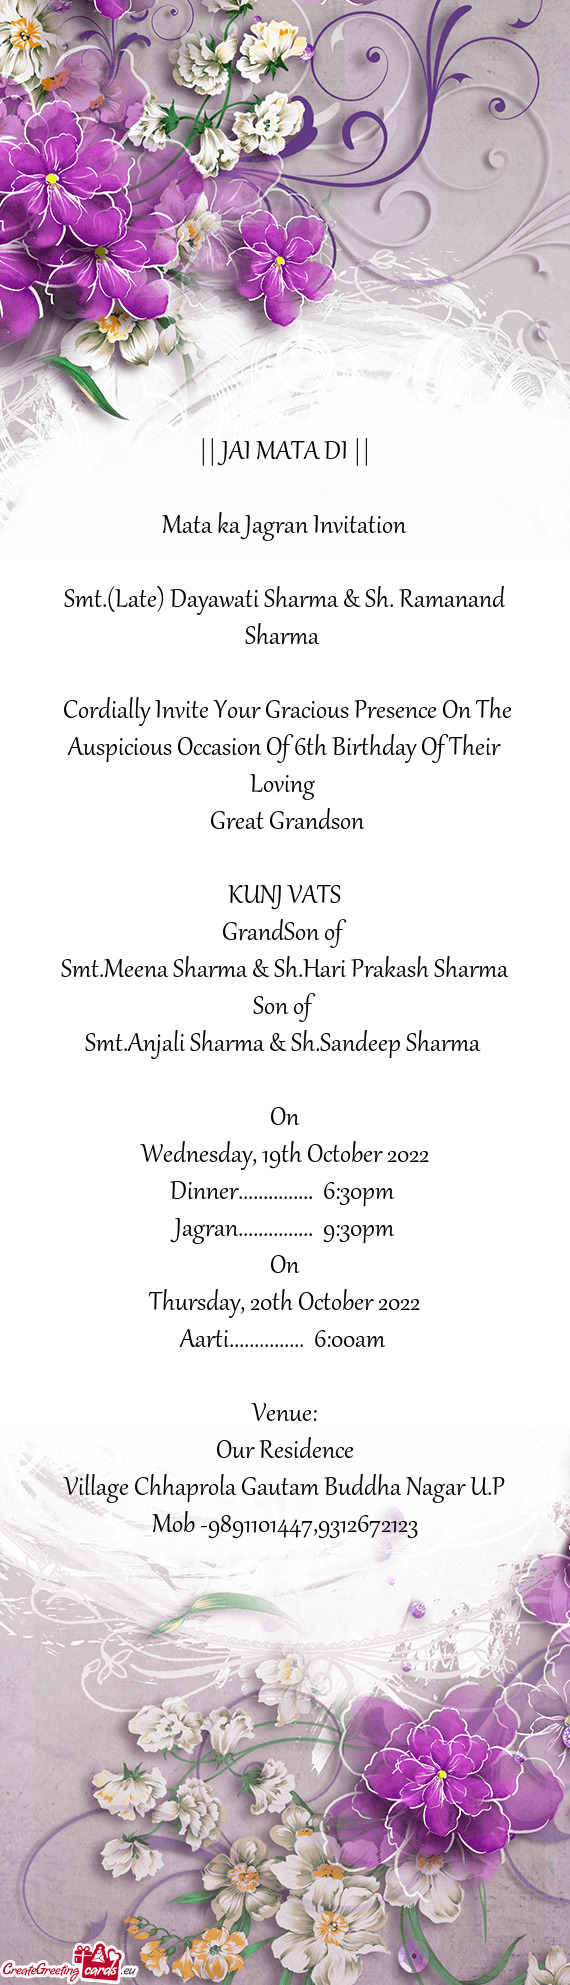 Cordially Invite Your Gracious Presence On The Auspicious Occasion Of 6th Birthday Of Their Loving